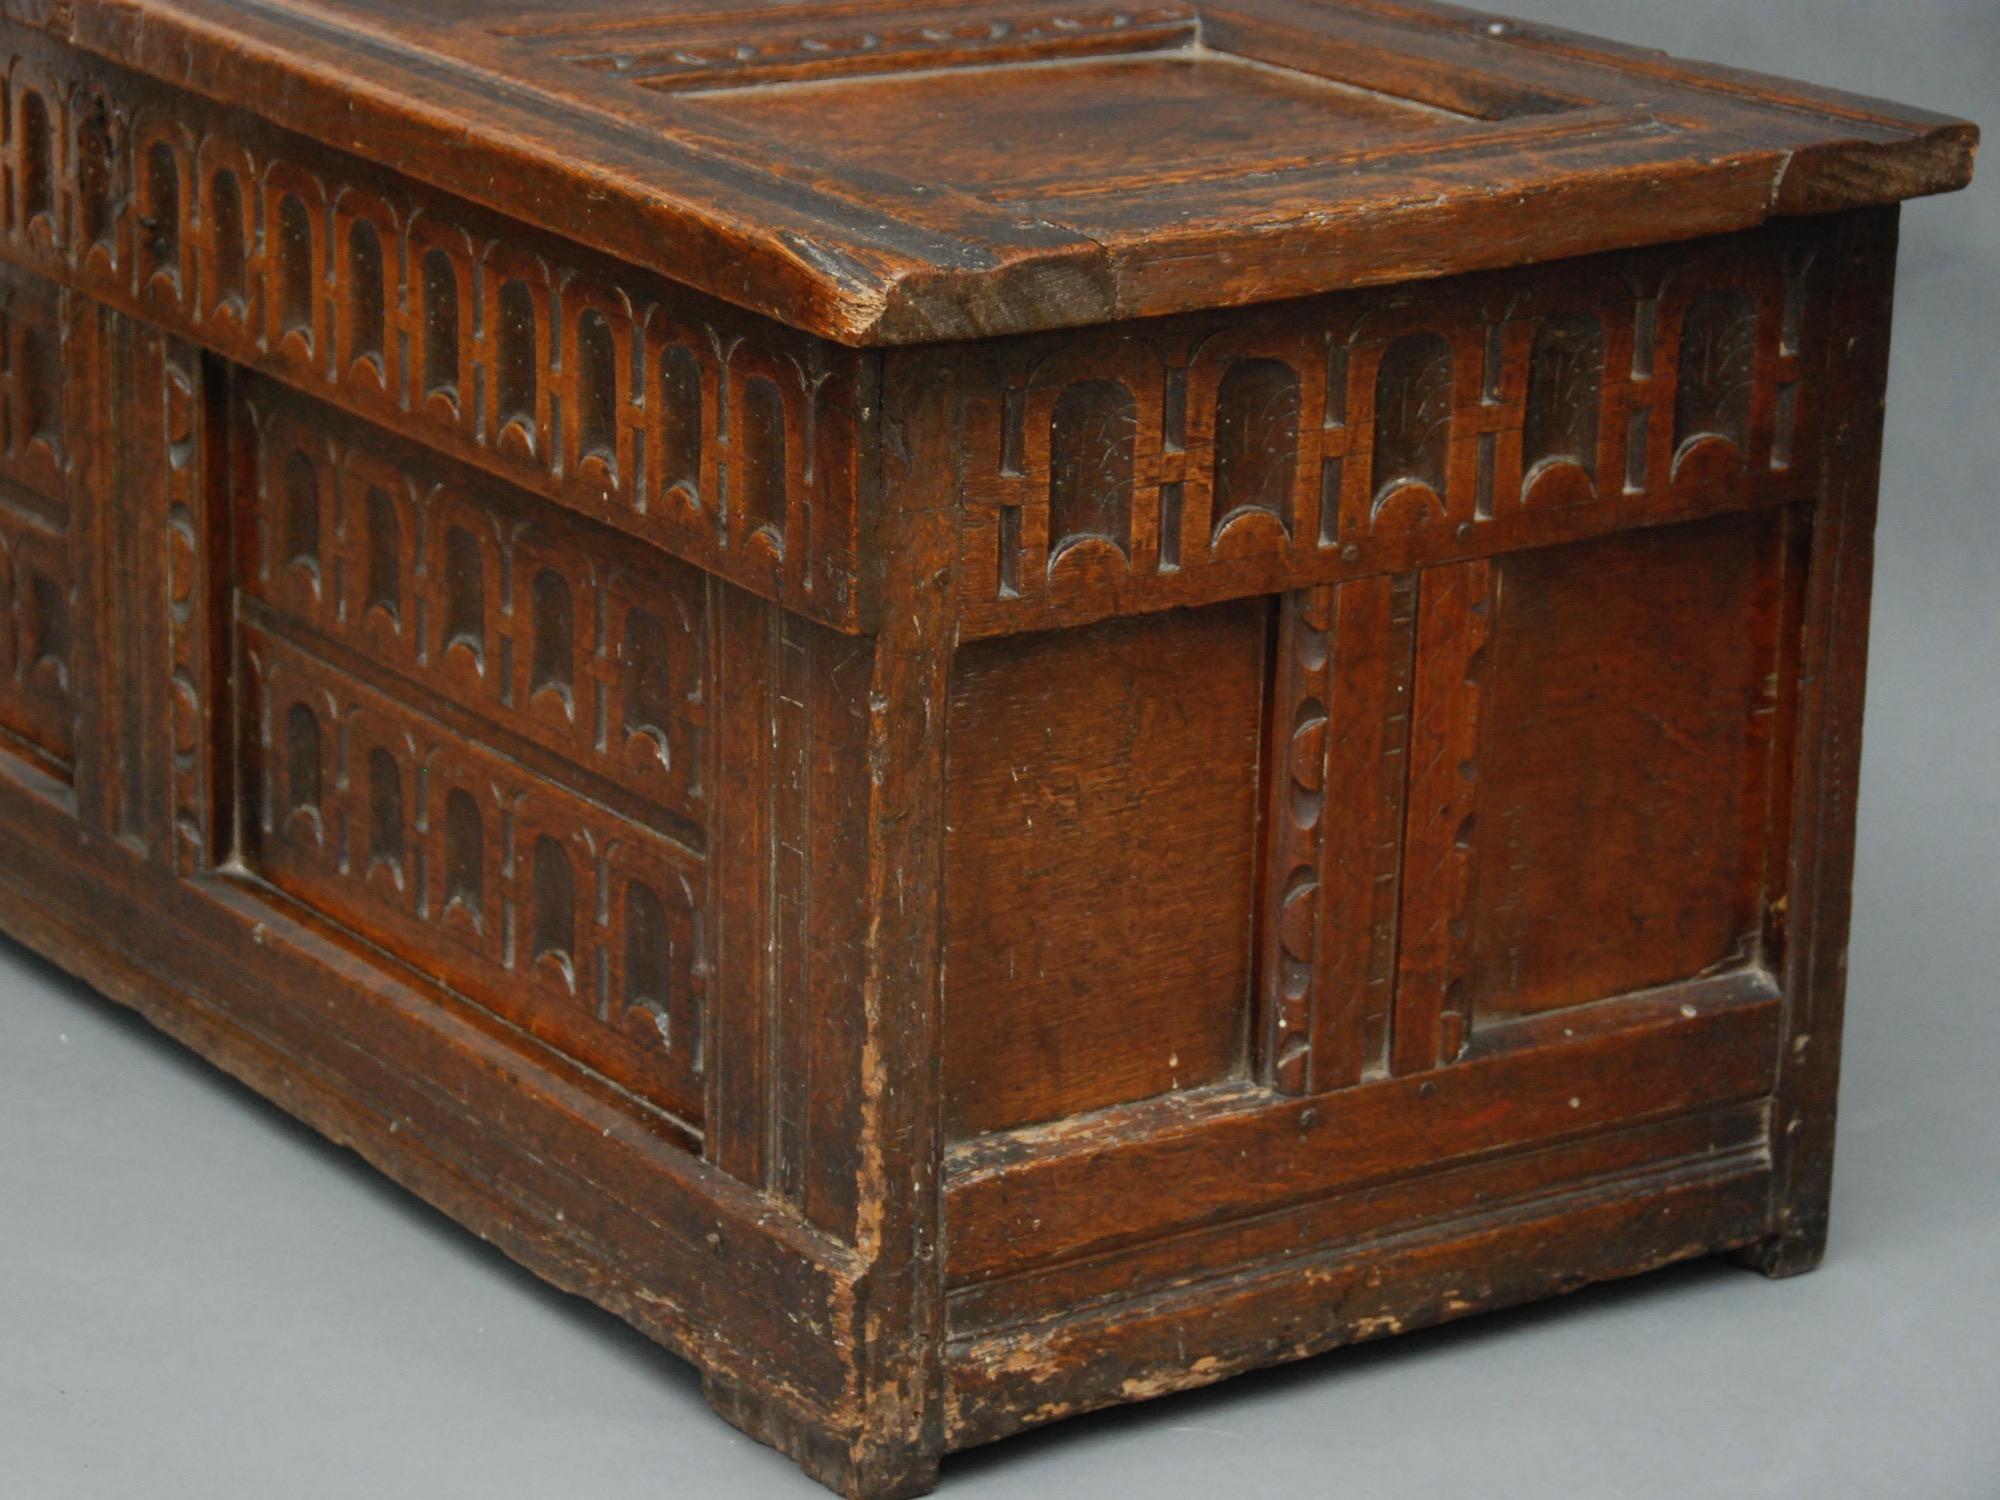 Hand-Carved 17th Century English Oak Chest